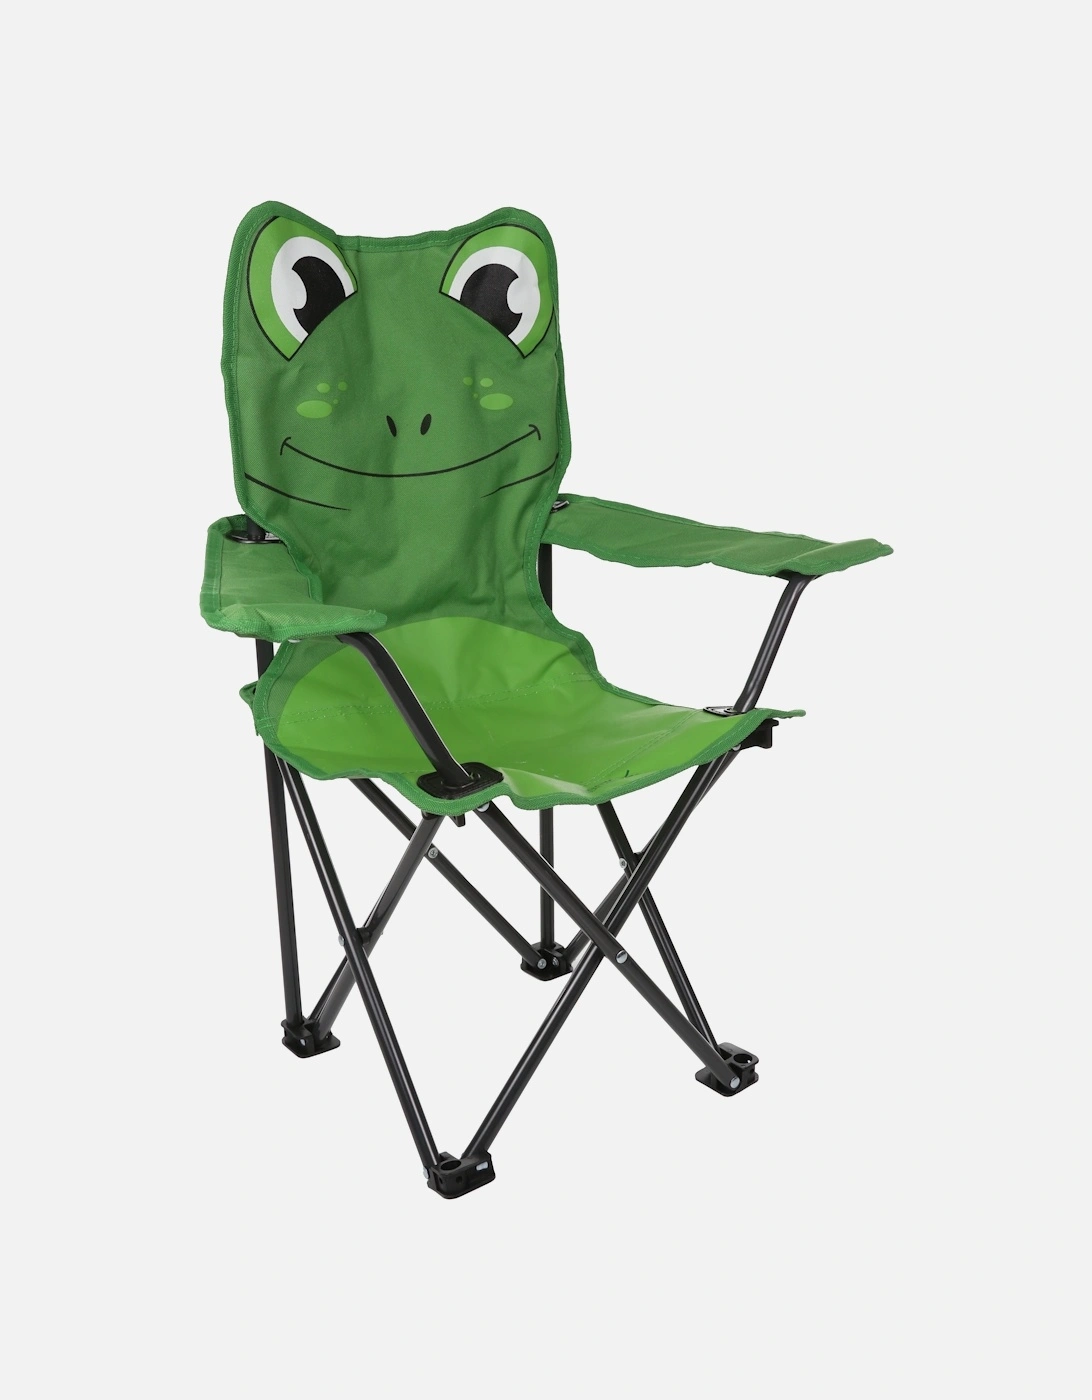 Kids Animal Outdoor Fold Up Camping Chair